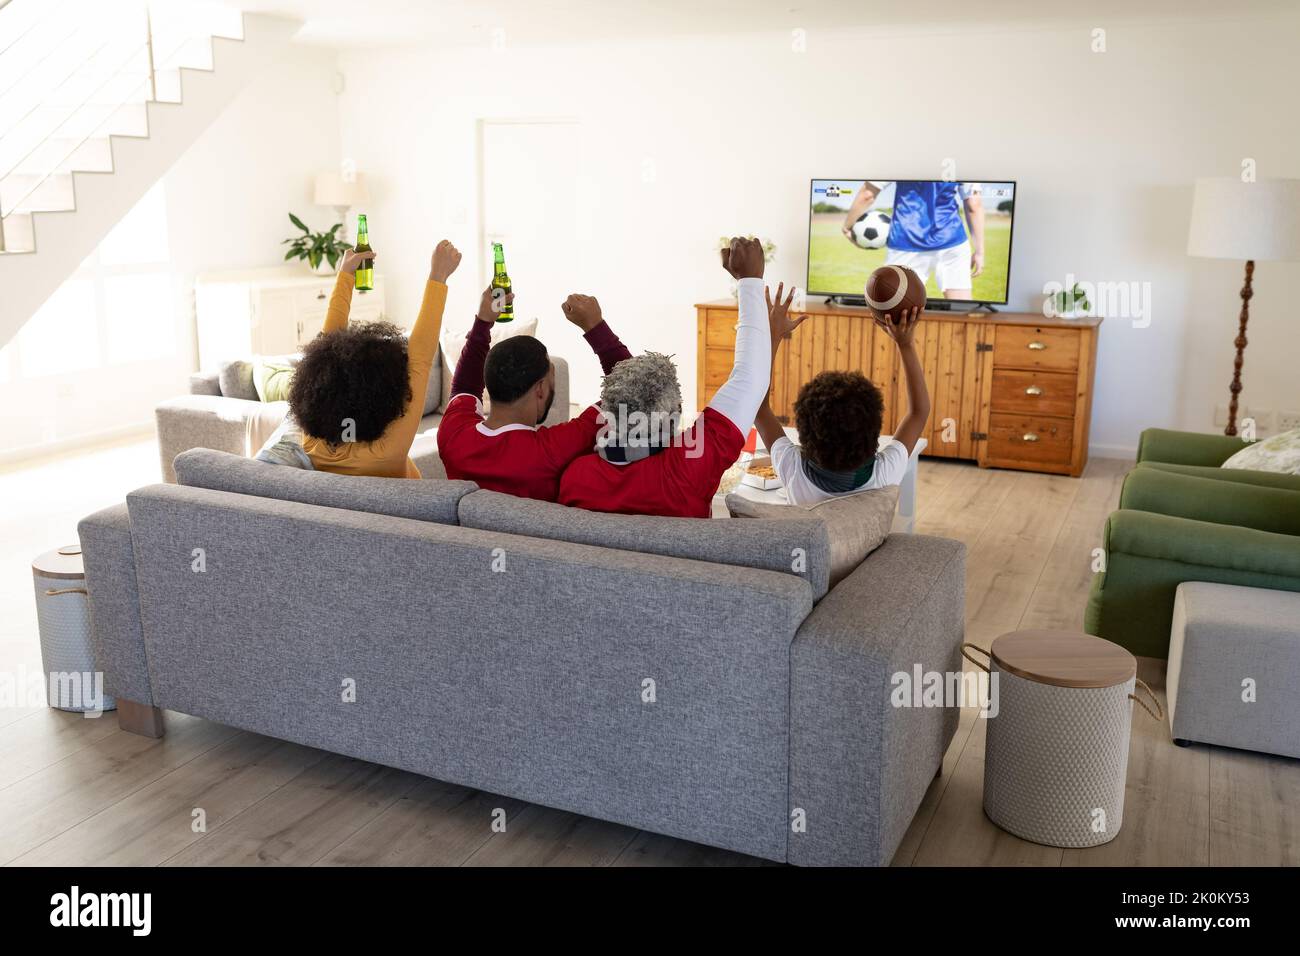 African american family sitting on the couch and watching football match on laptop Stock Photo